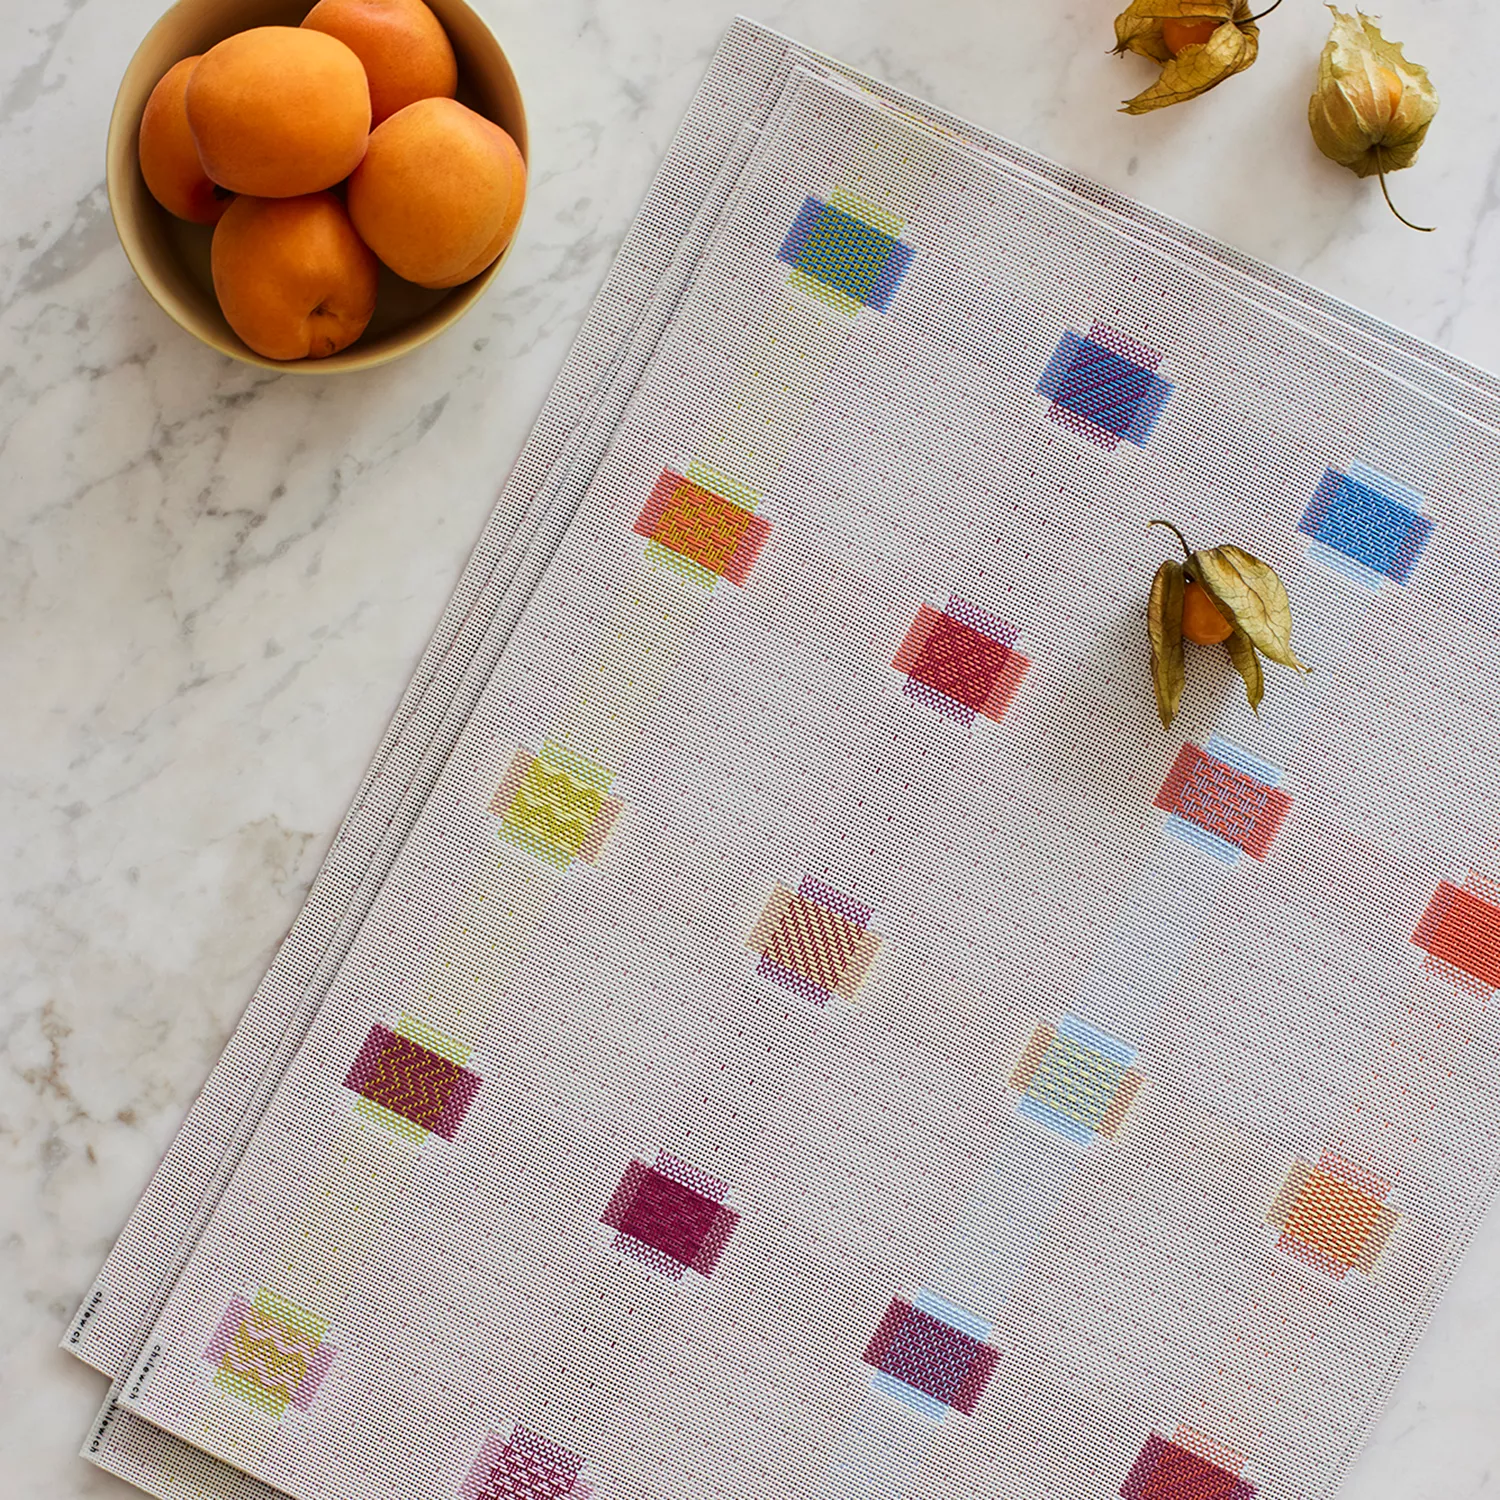 Chilewich Sampler Easy-Care Placemat